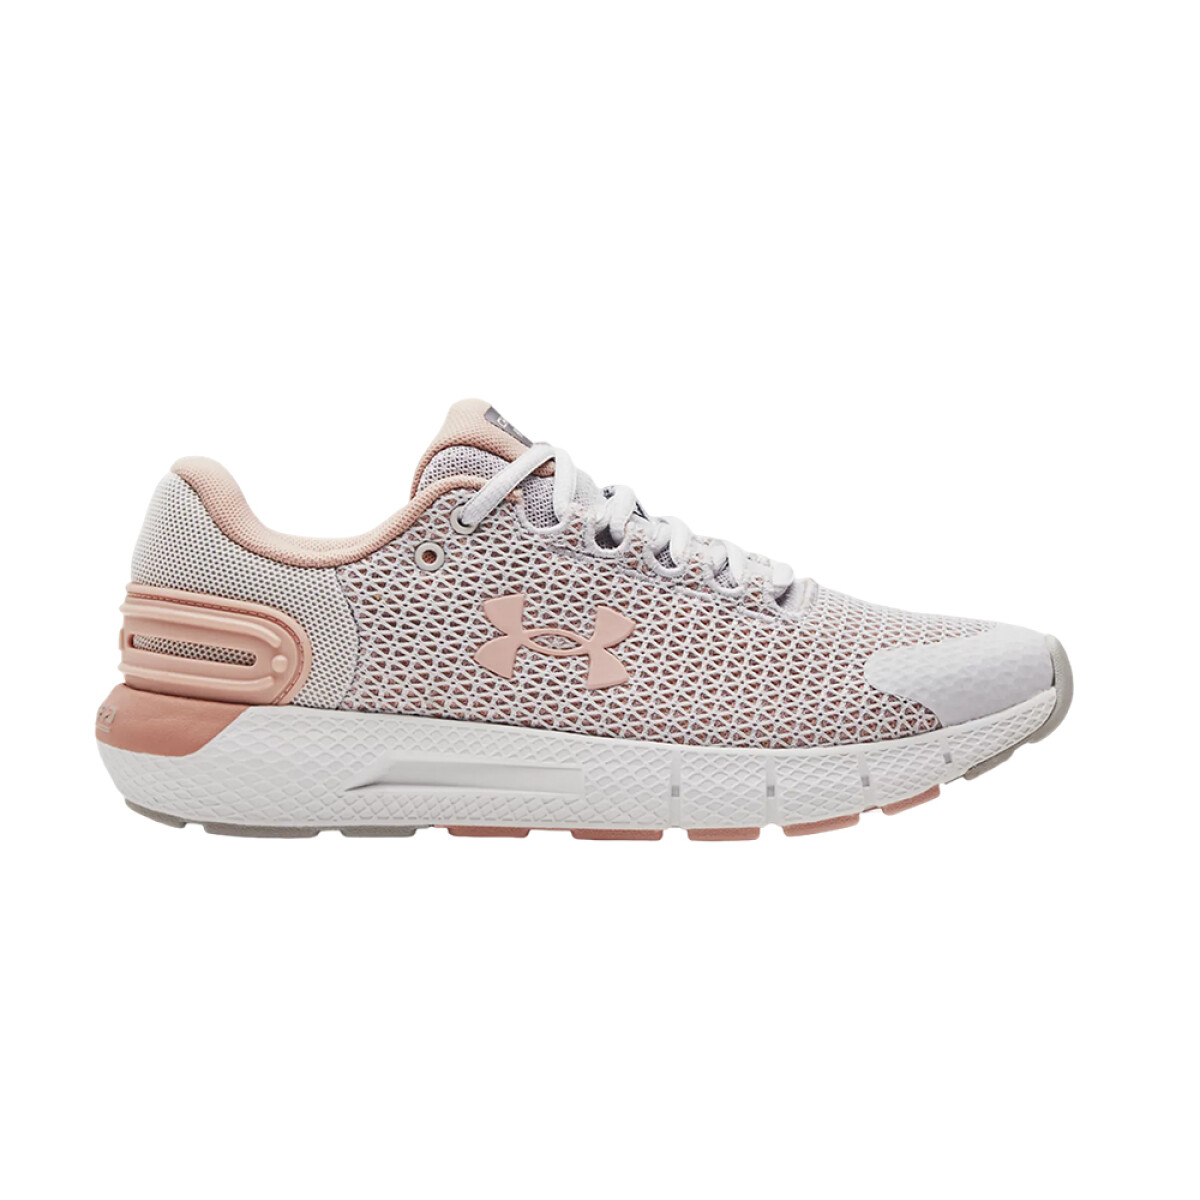 UNDER ARMOUR CHARGED ROGUE 2.5 - Grey/Salmon 